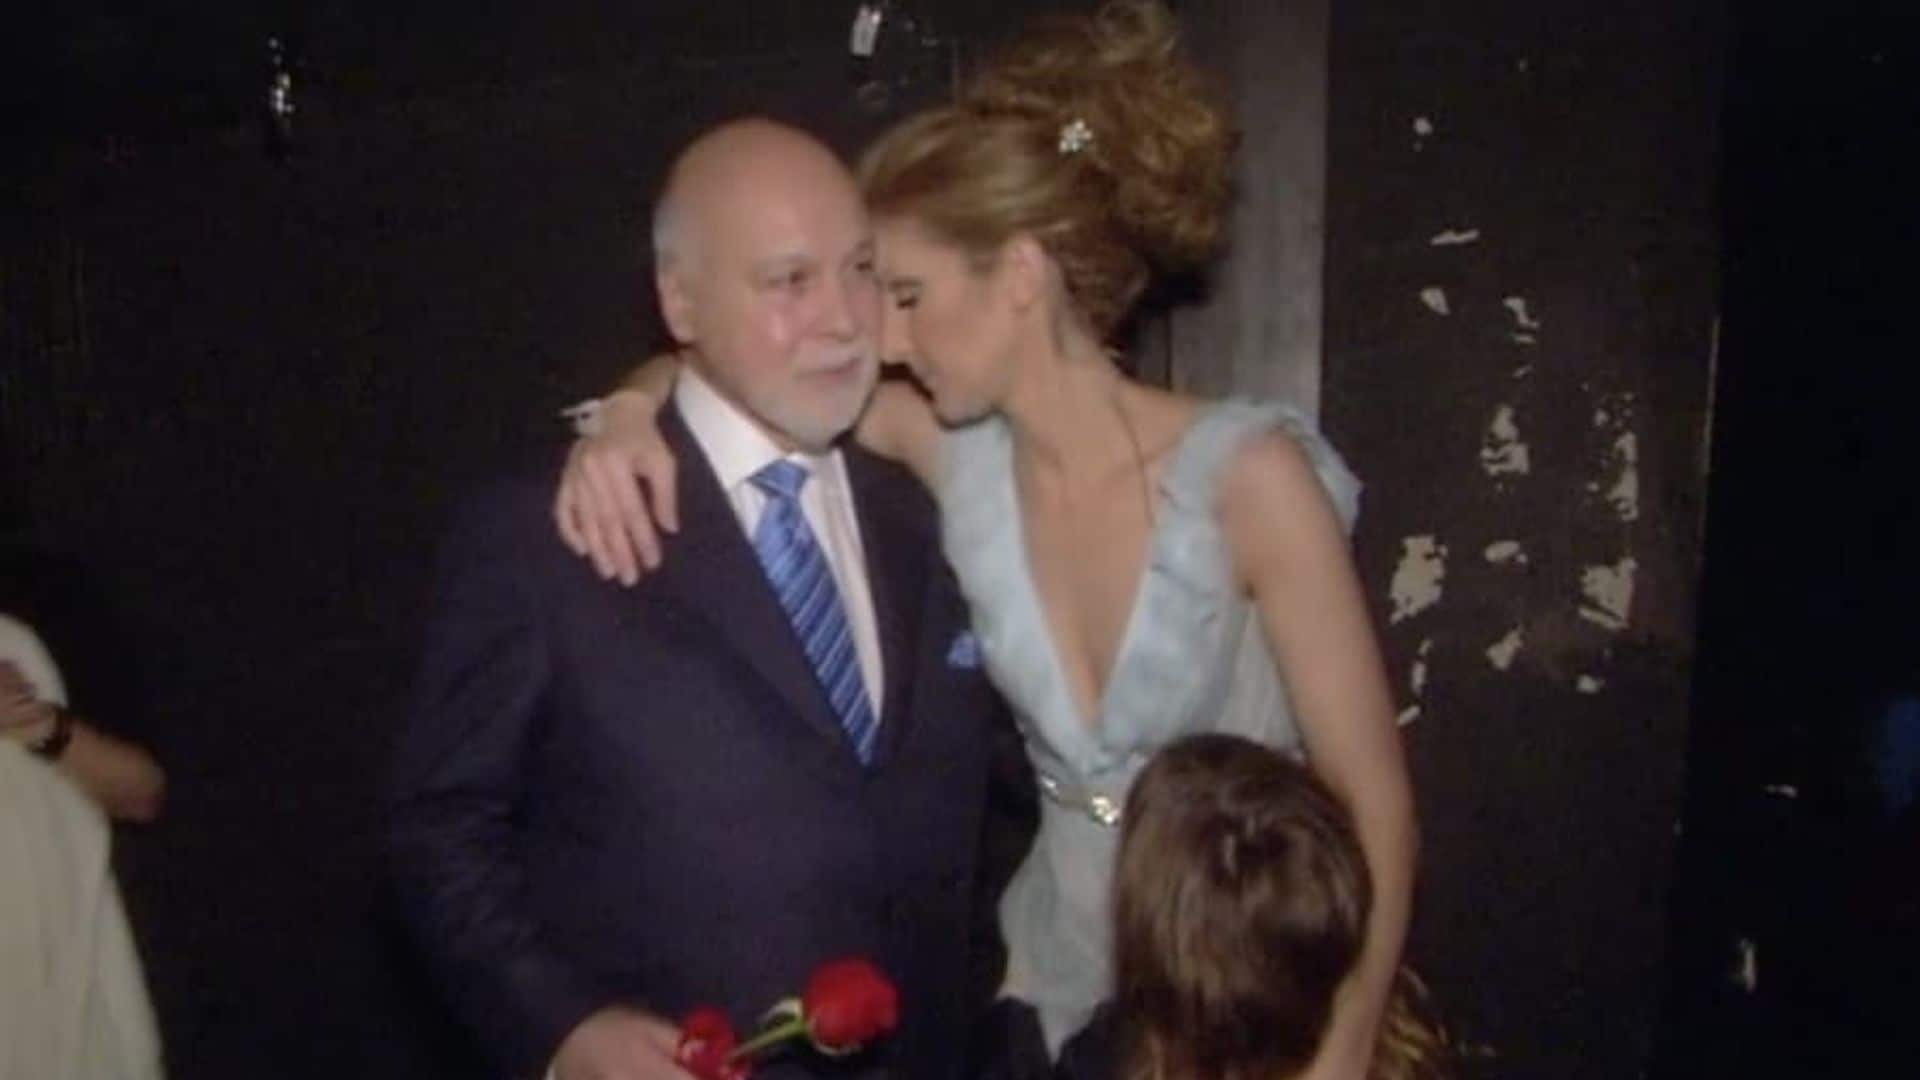 Celine Dion shared a touching video tribute to her husband Rene on the year anniversary of his death.
Photo: Facebook/Celine Dion